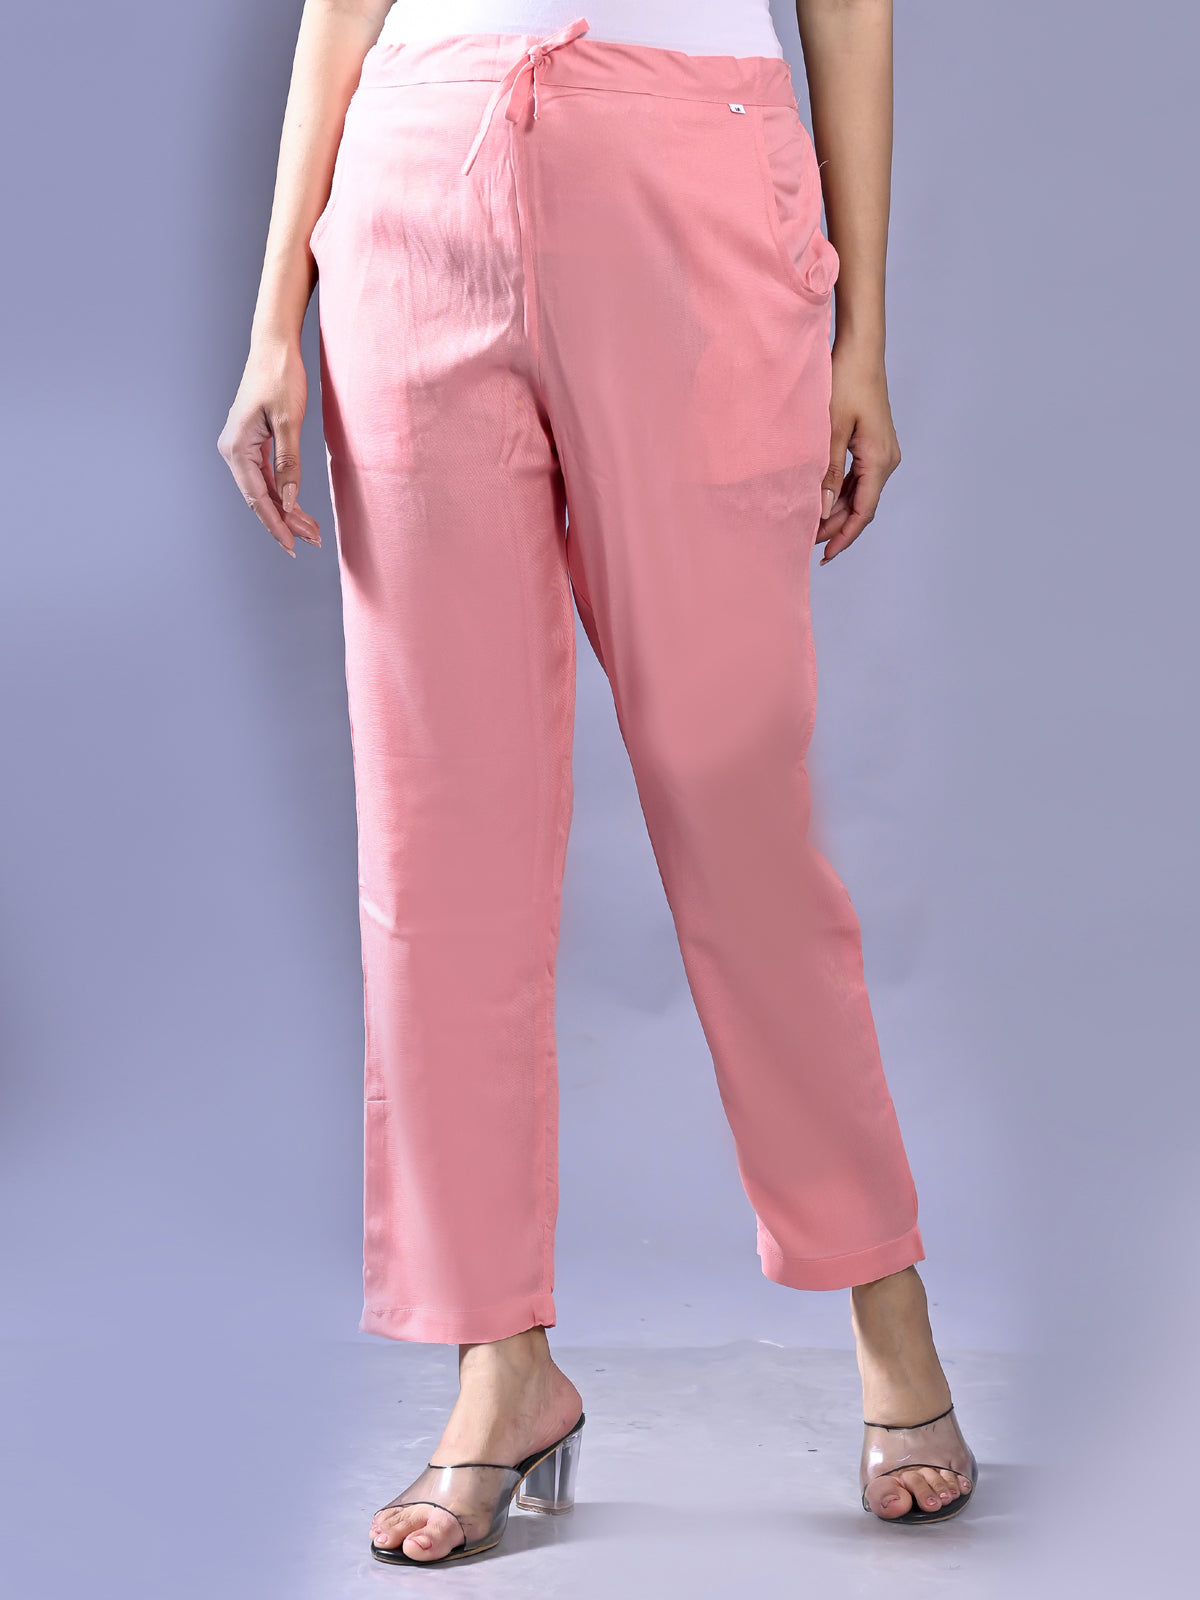 Buy KOTTY Pack of 2 Women Regular Fit Viscose Rayon Trousers at Amazon.in